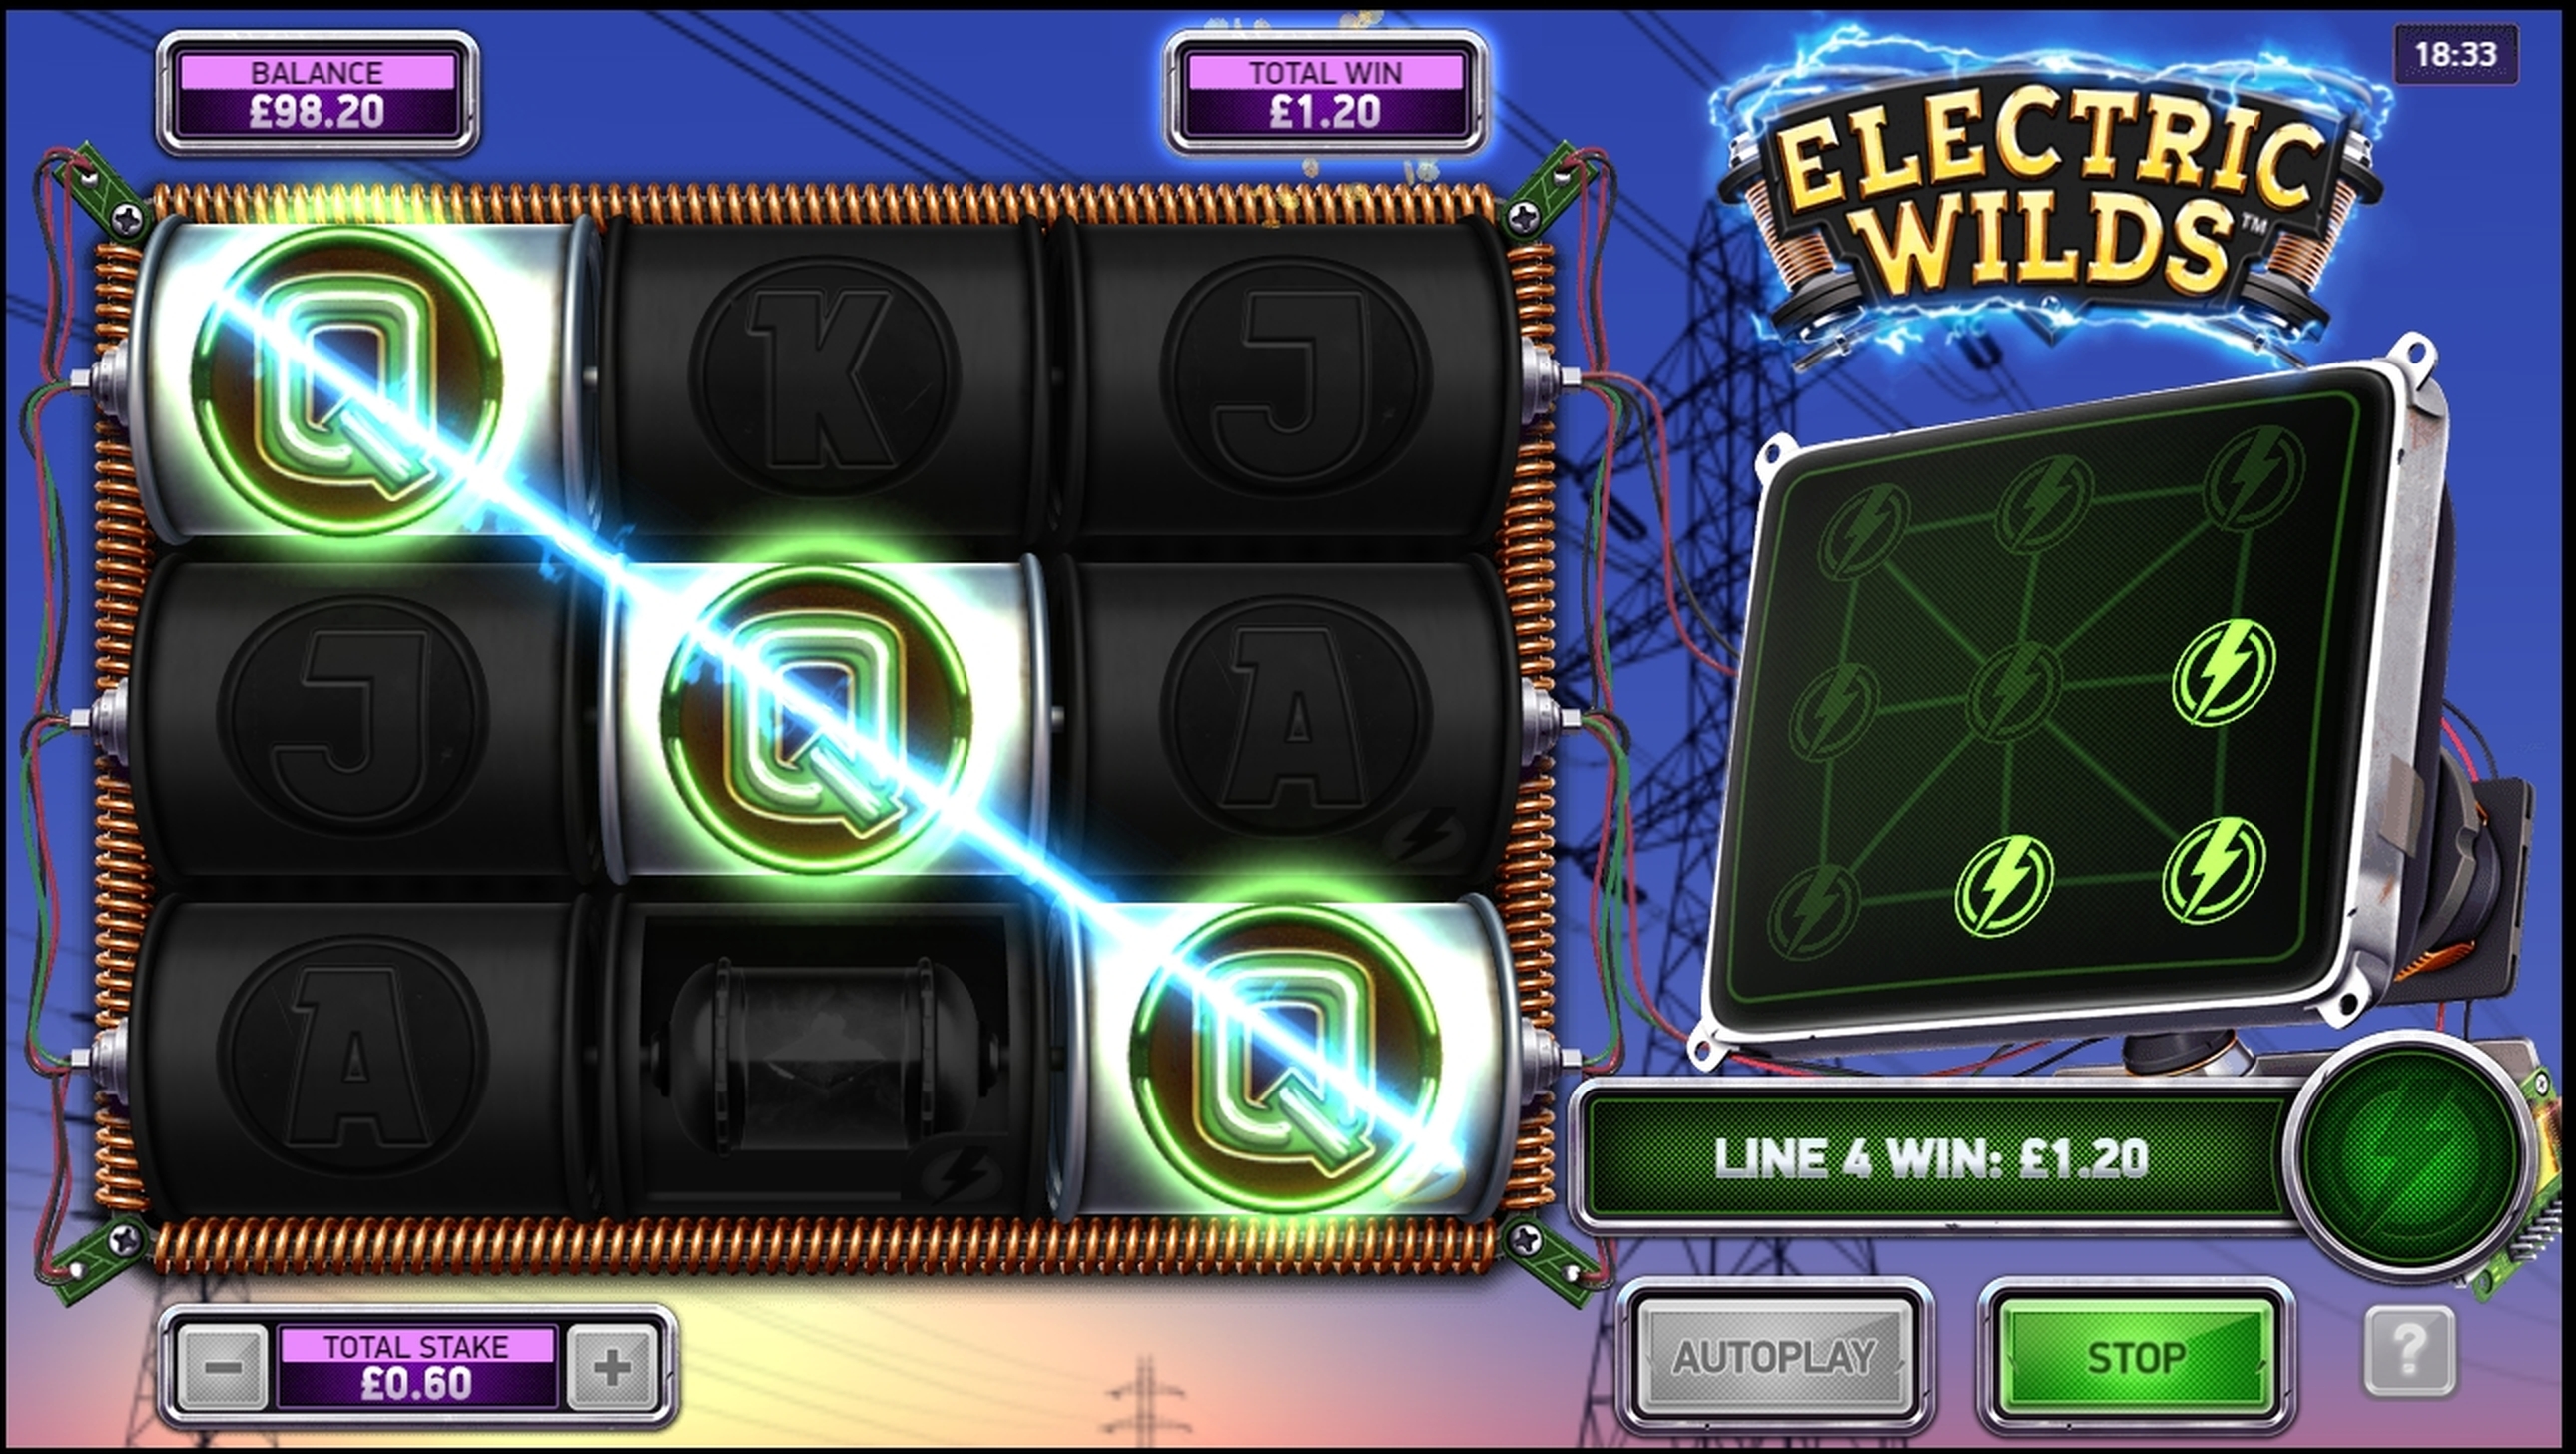 Win Money in Electric Wilds Free Slot Game by Northern Lights Gaming